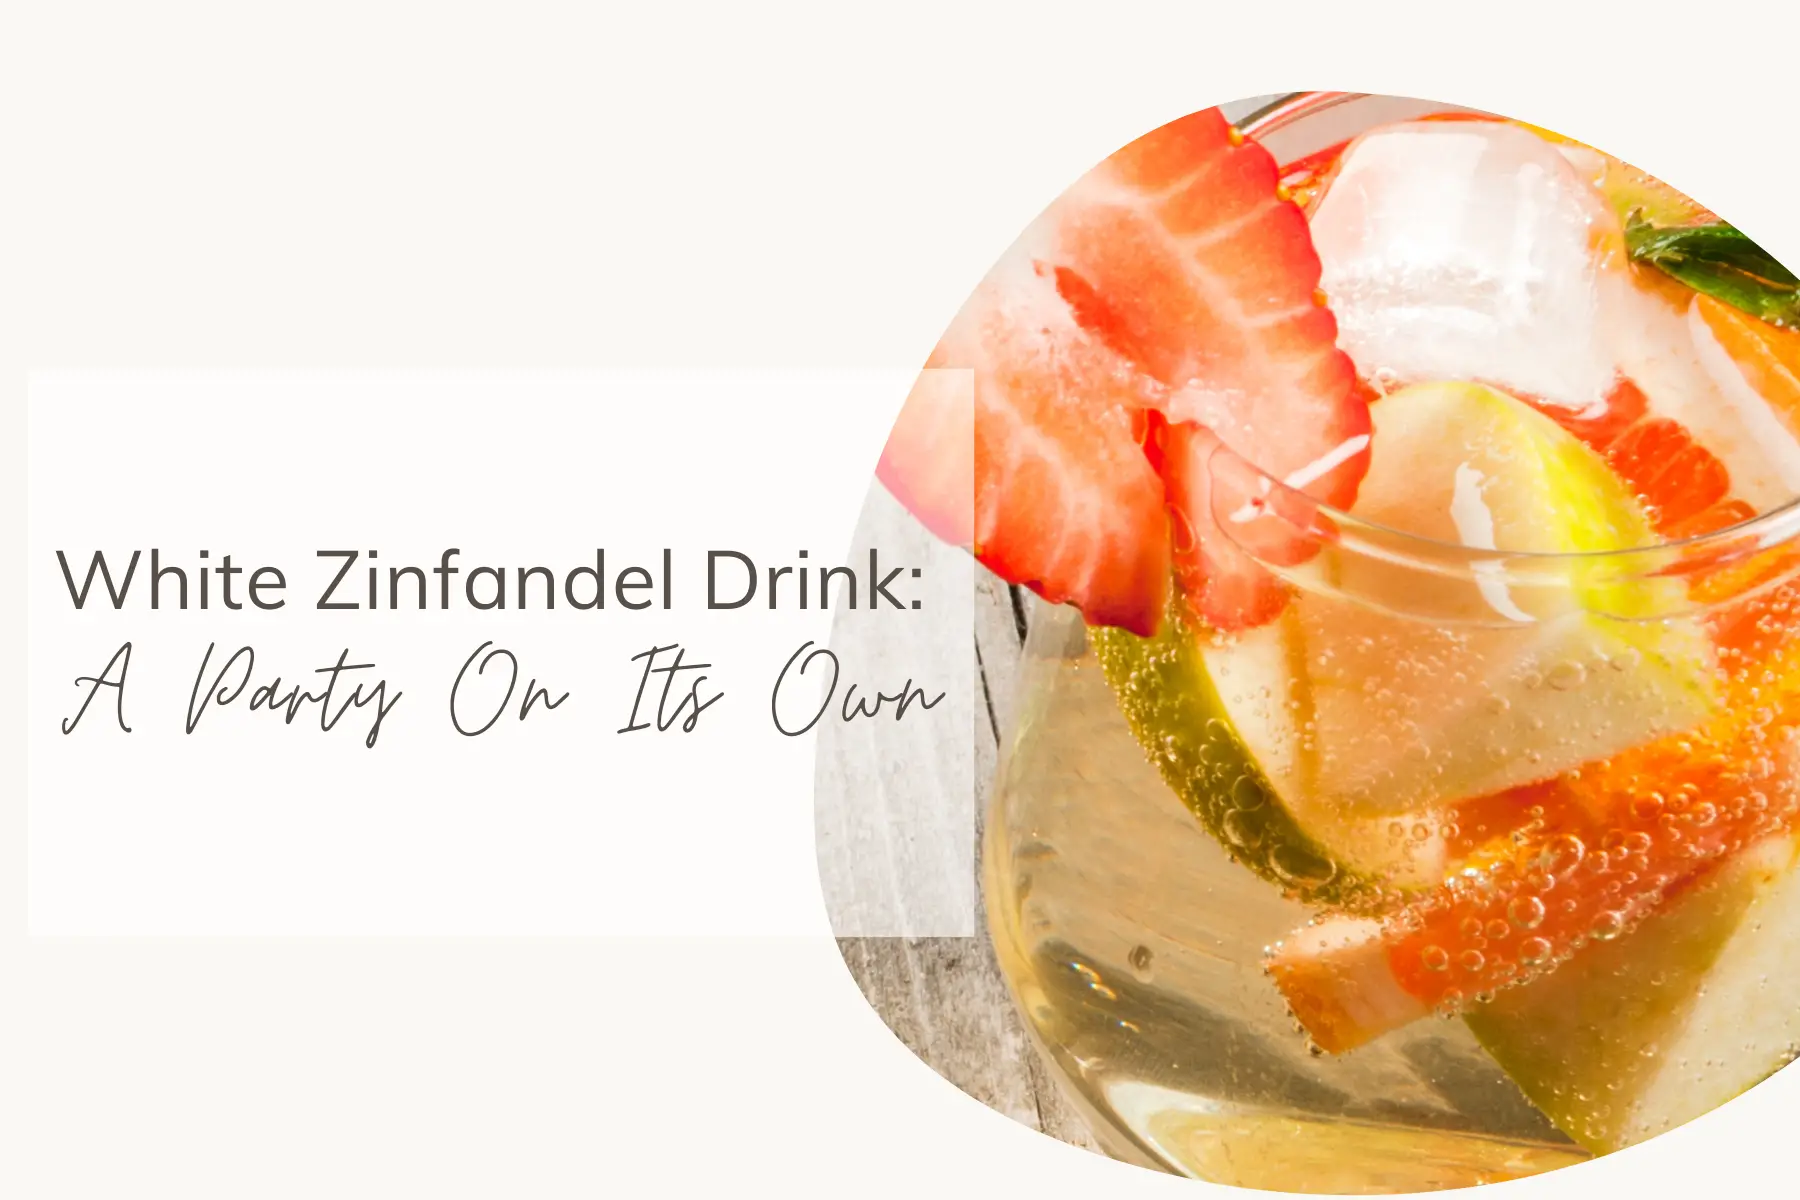 White Zinfandel Drink: A Party On Its Own